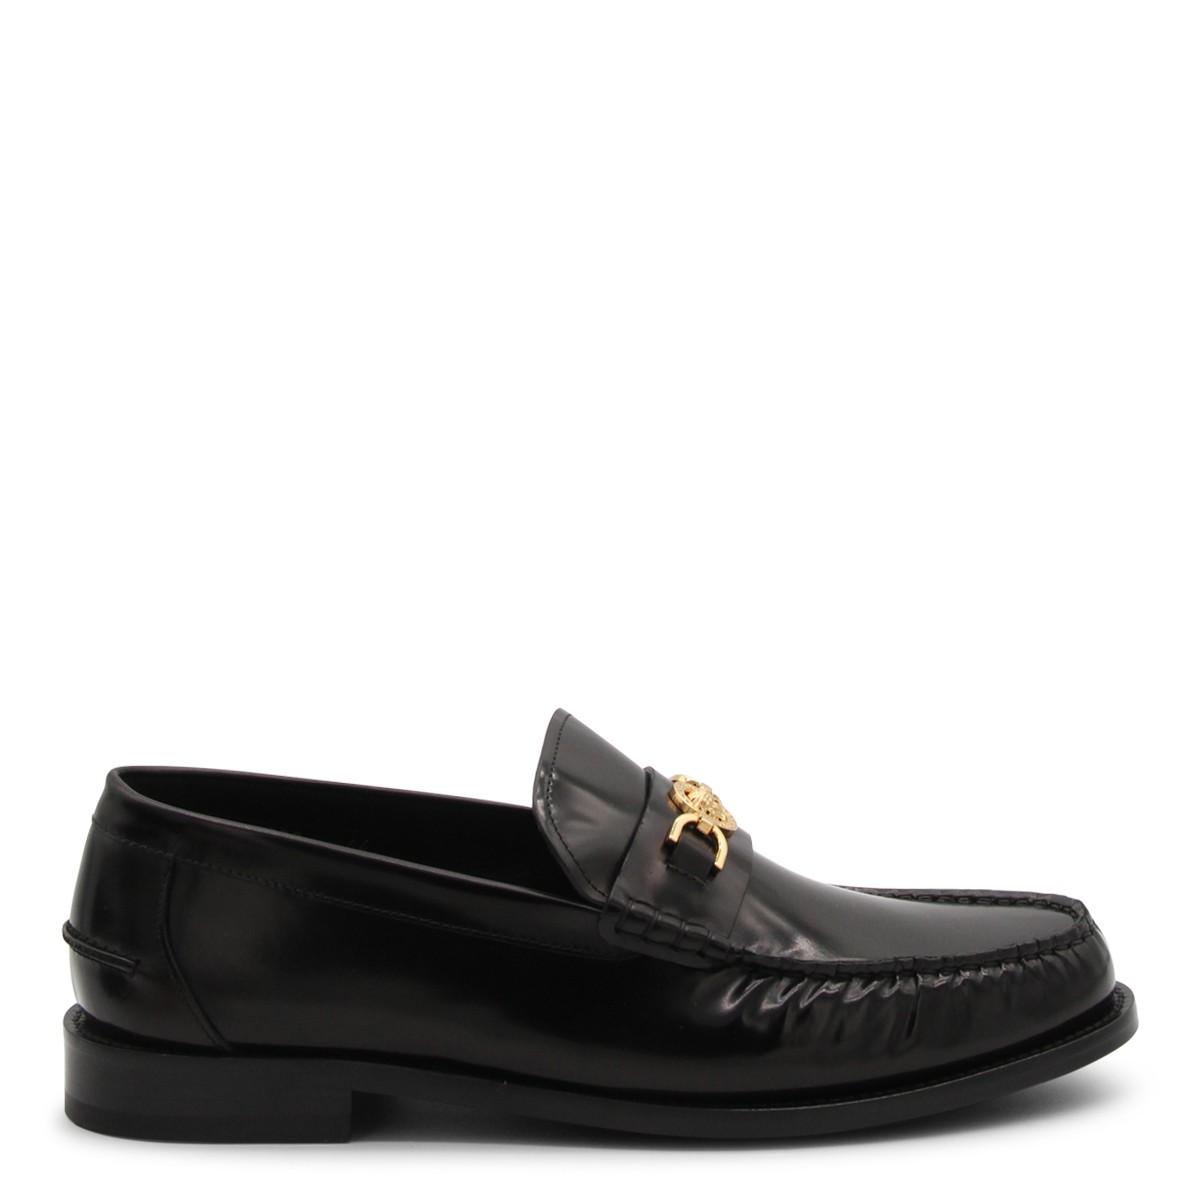 BLACK AND GOLD LEATHER MEDUSA LOAFERS